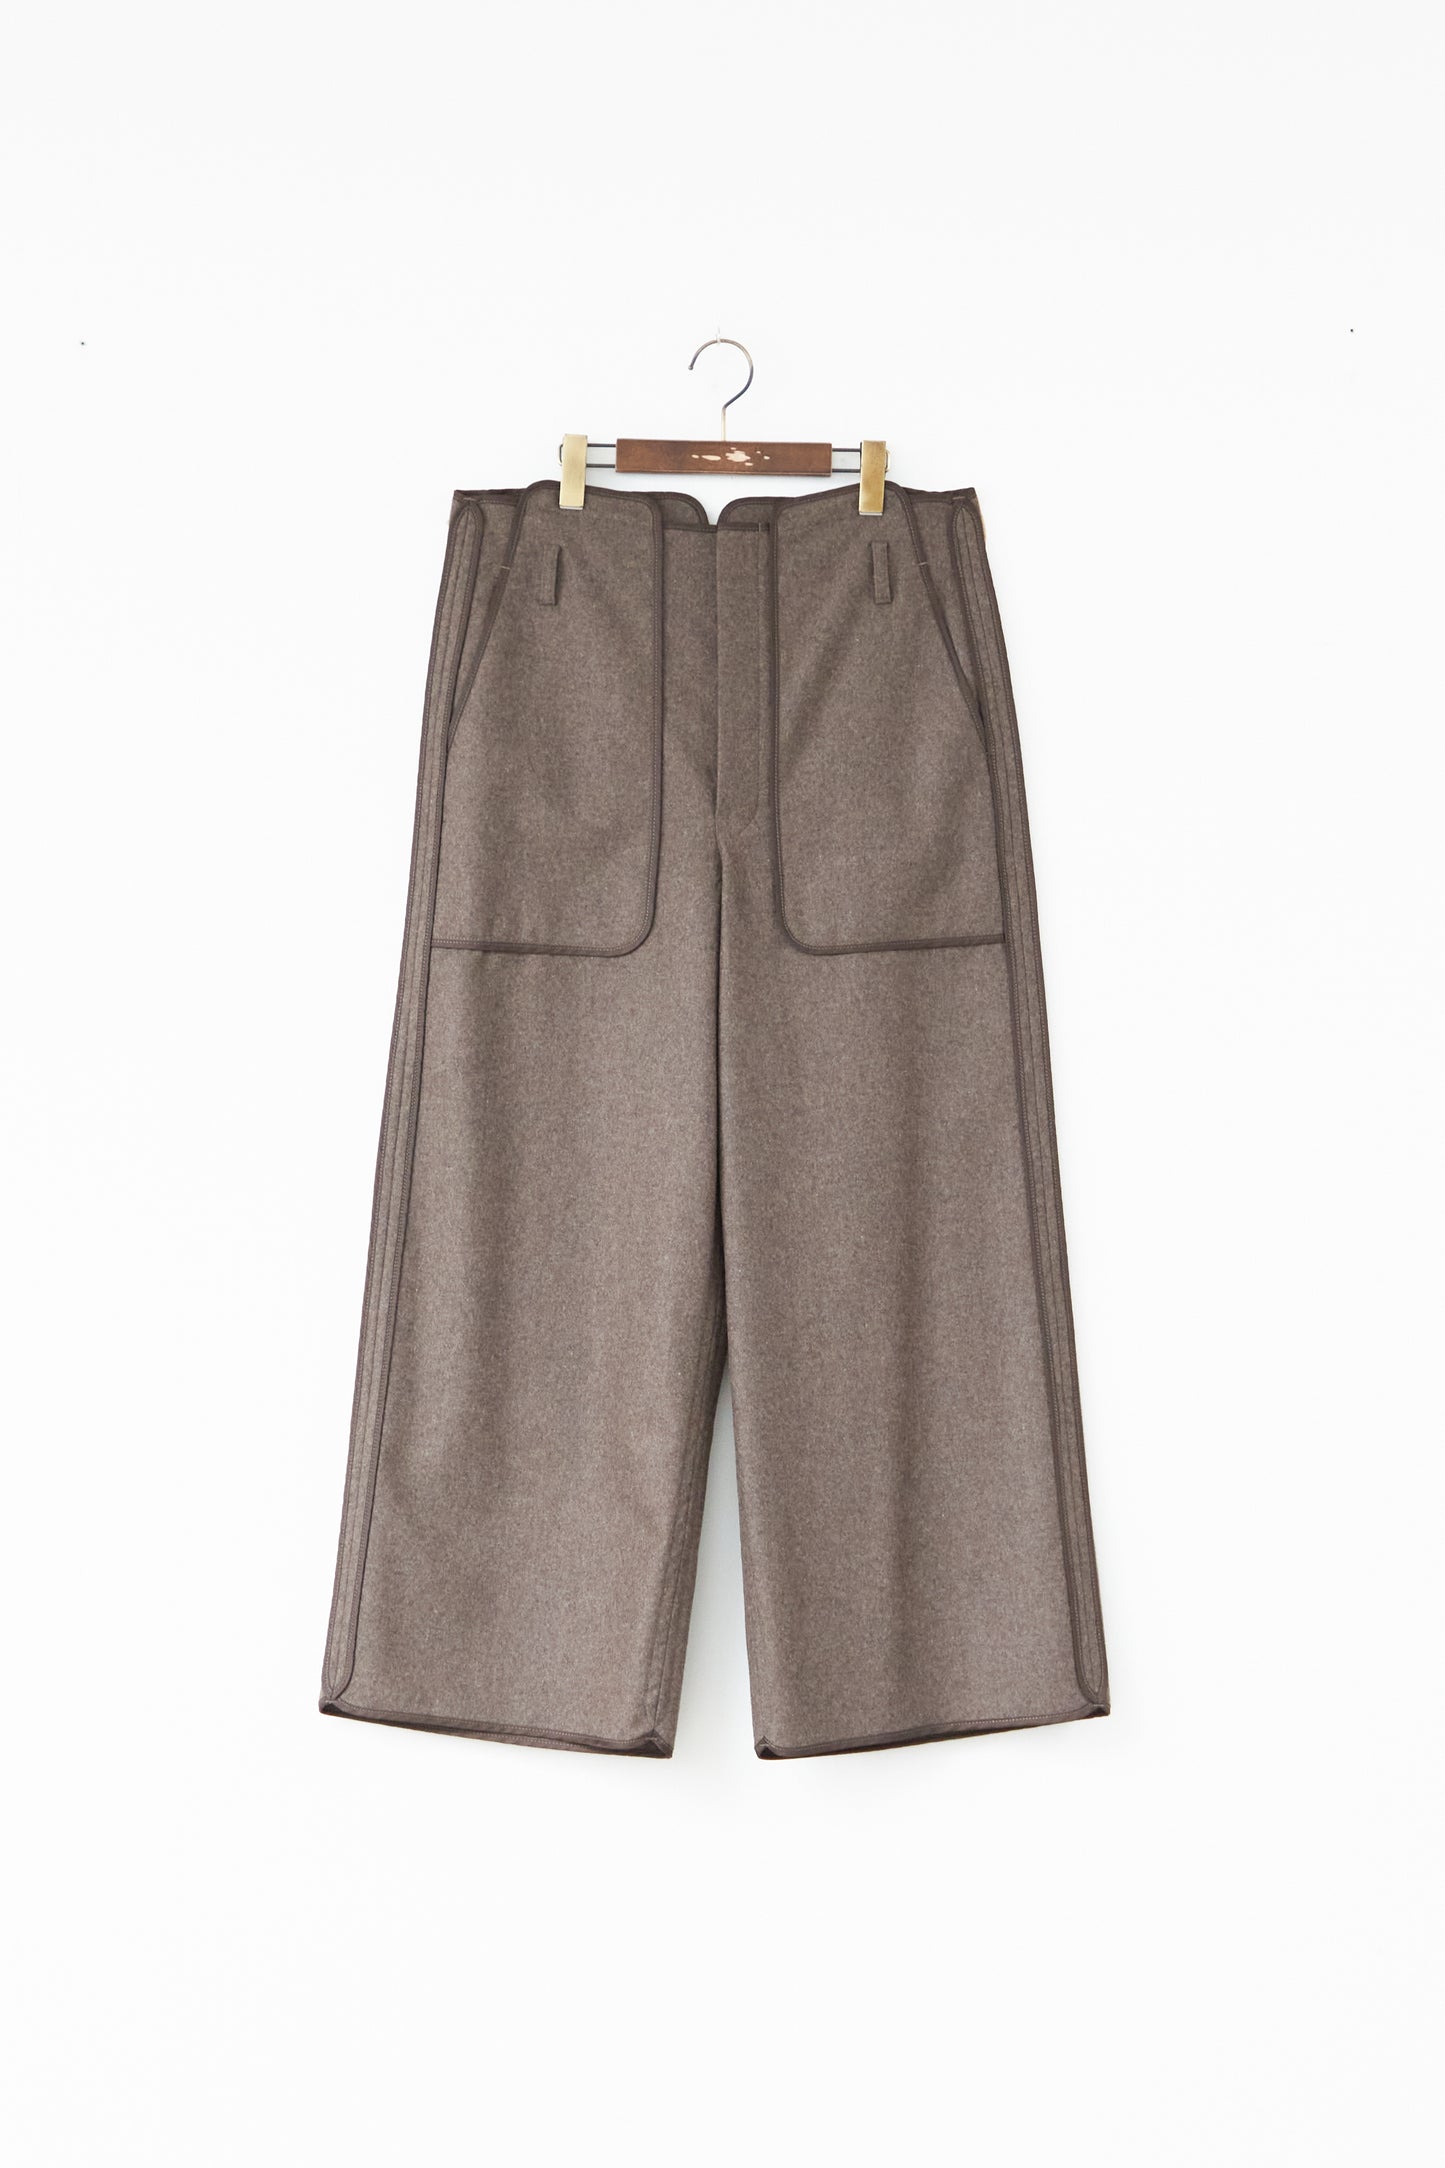 with PIPING : LIGHT MELTON PANTS